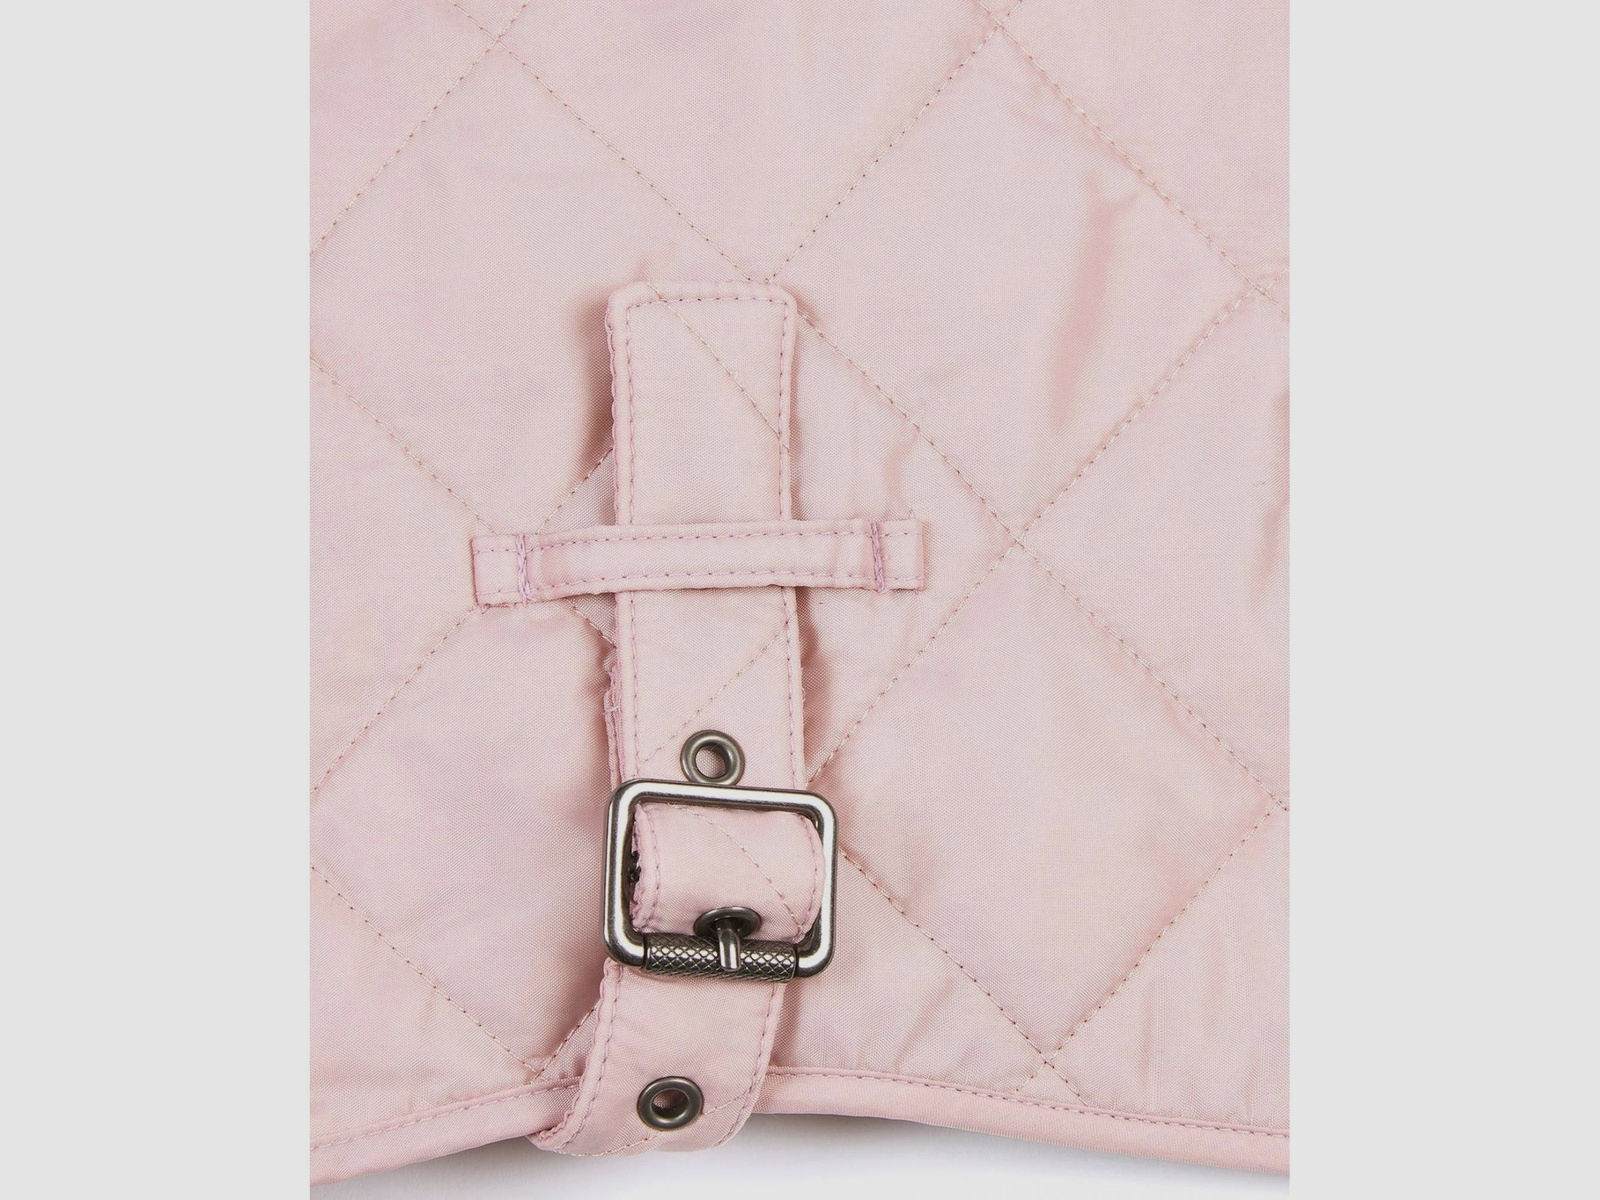 Barbour Hundemantel Quilted, Farbe Pink L